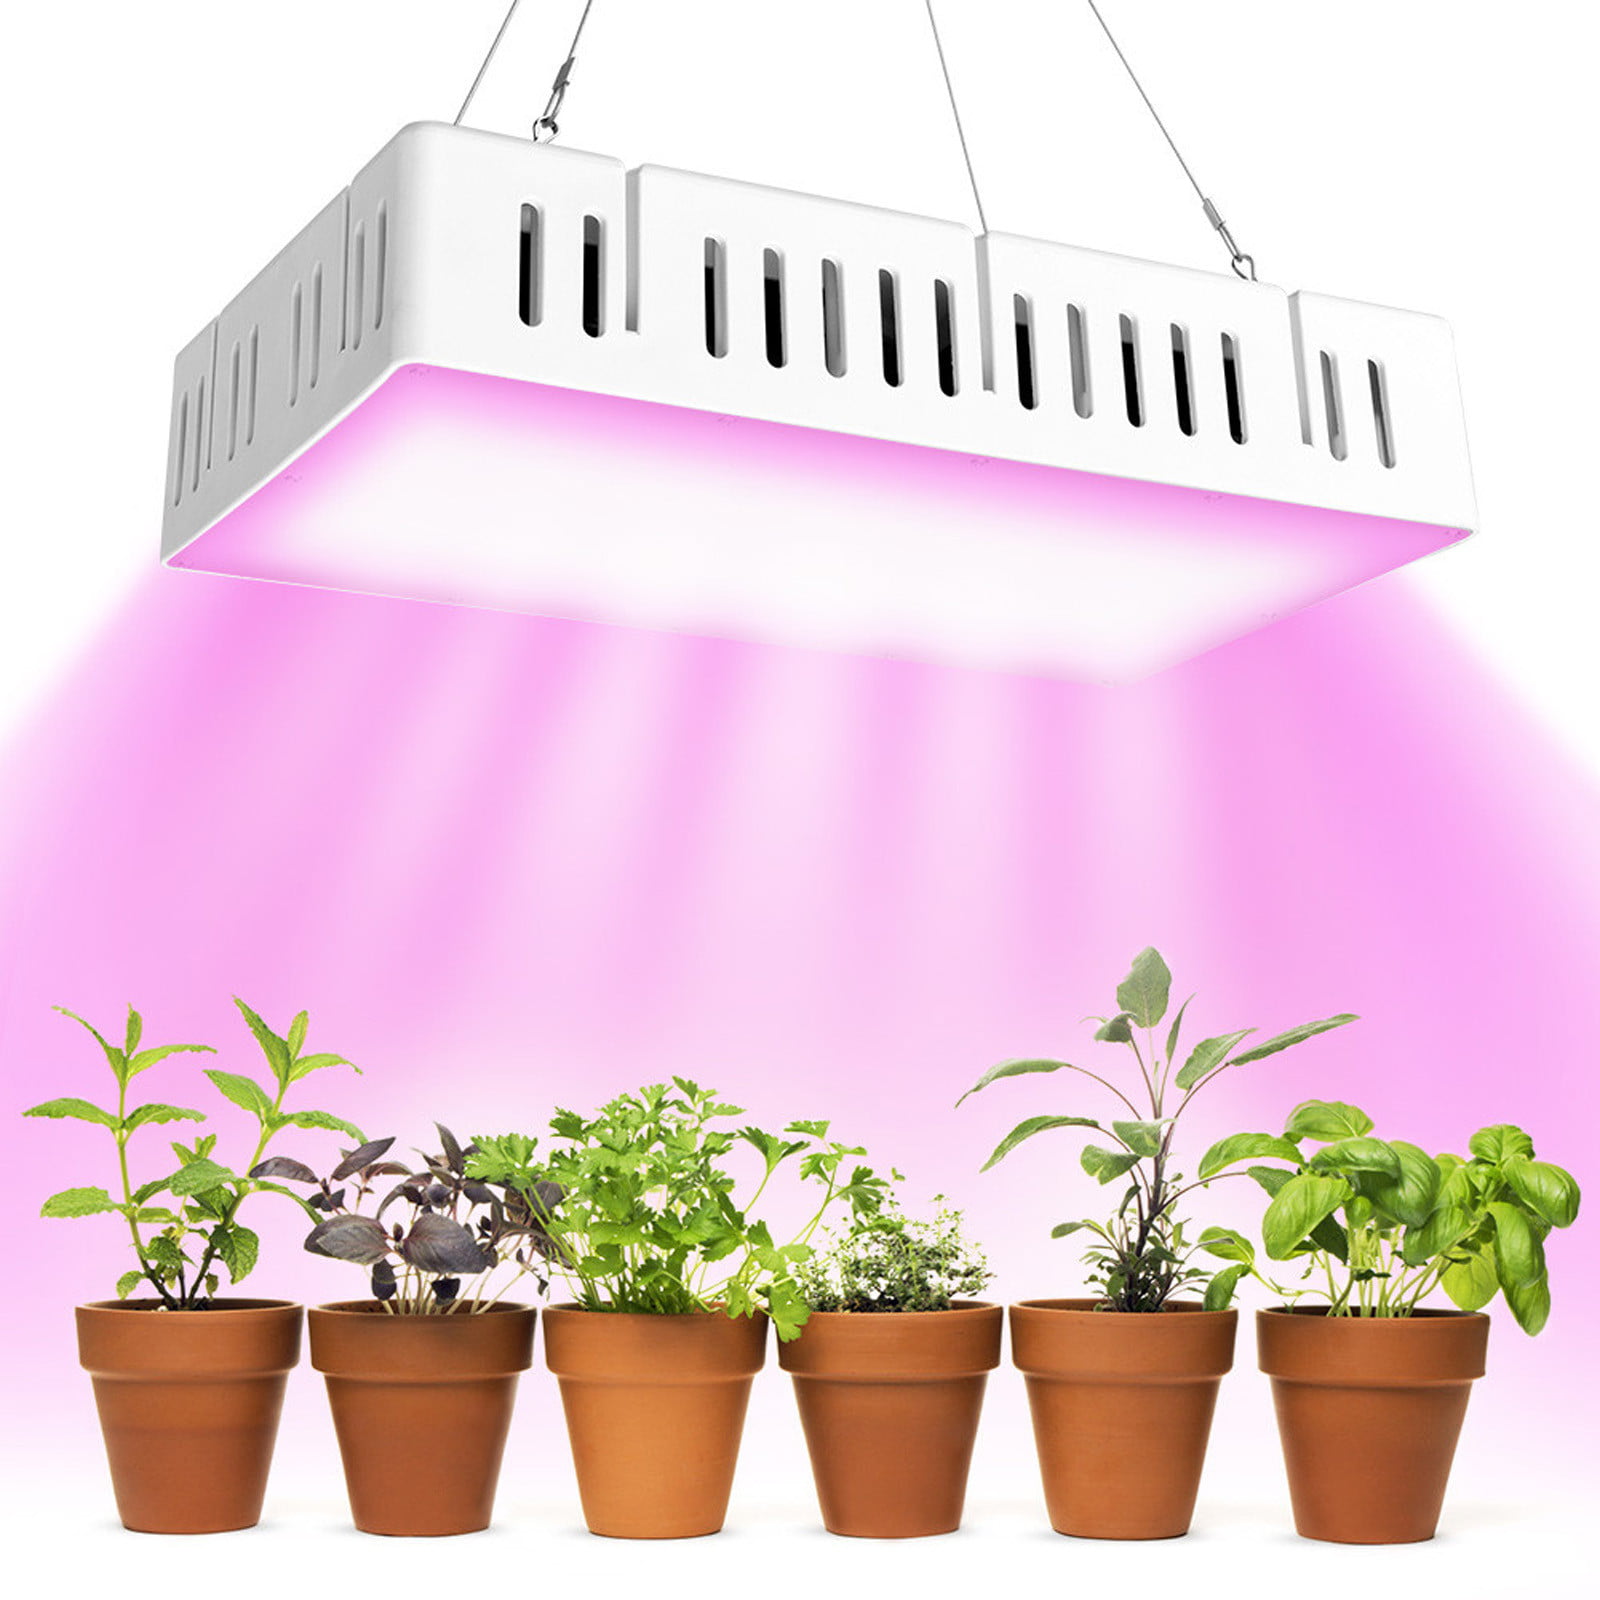 Grow Light Relassy Full Spectrum LED Plant Grow Light Strip with Auto Cycle Timer 3/6/12H Growing Lamp Bar for Indoor Plants Multi-Channel 4 Dimmable Levels for Gardening Seeding Plant 5 Pack 